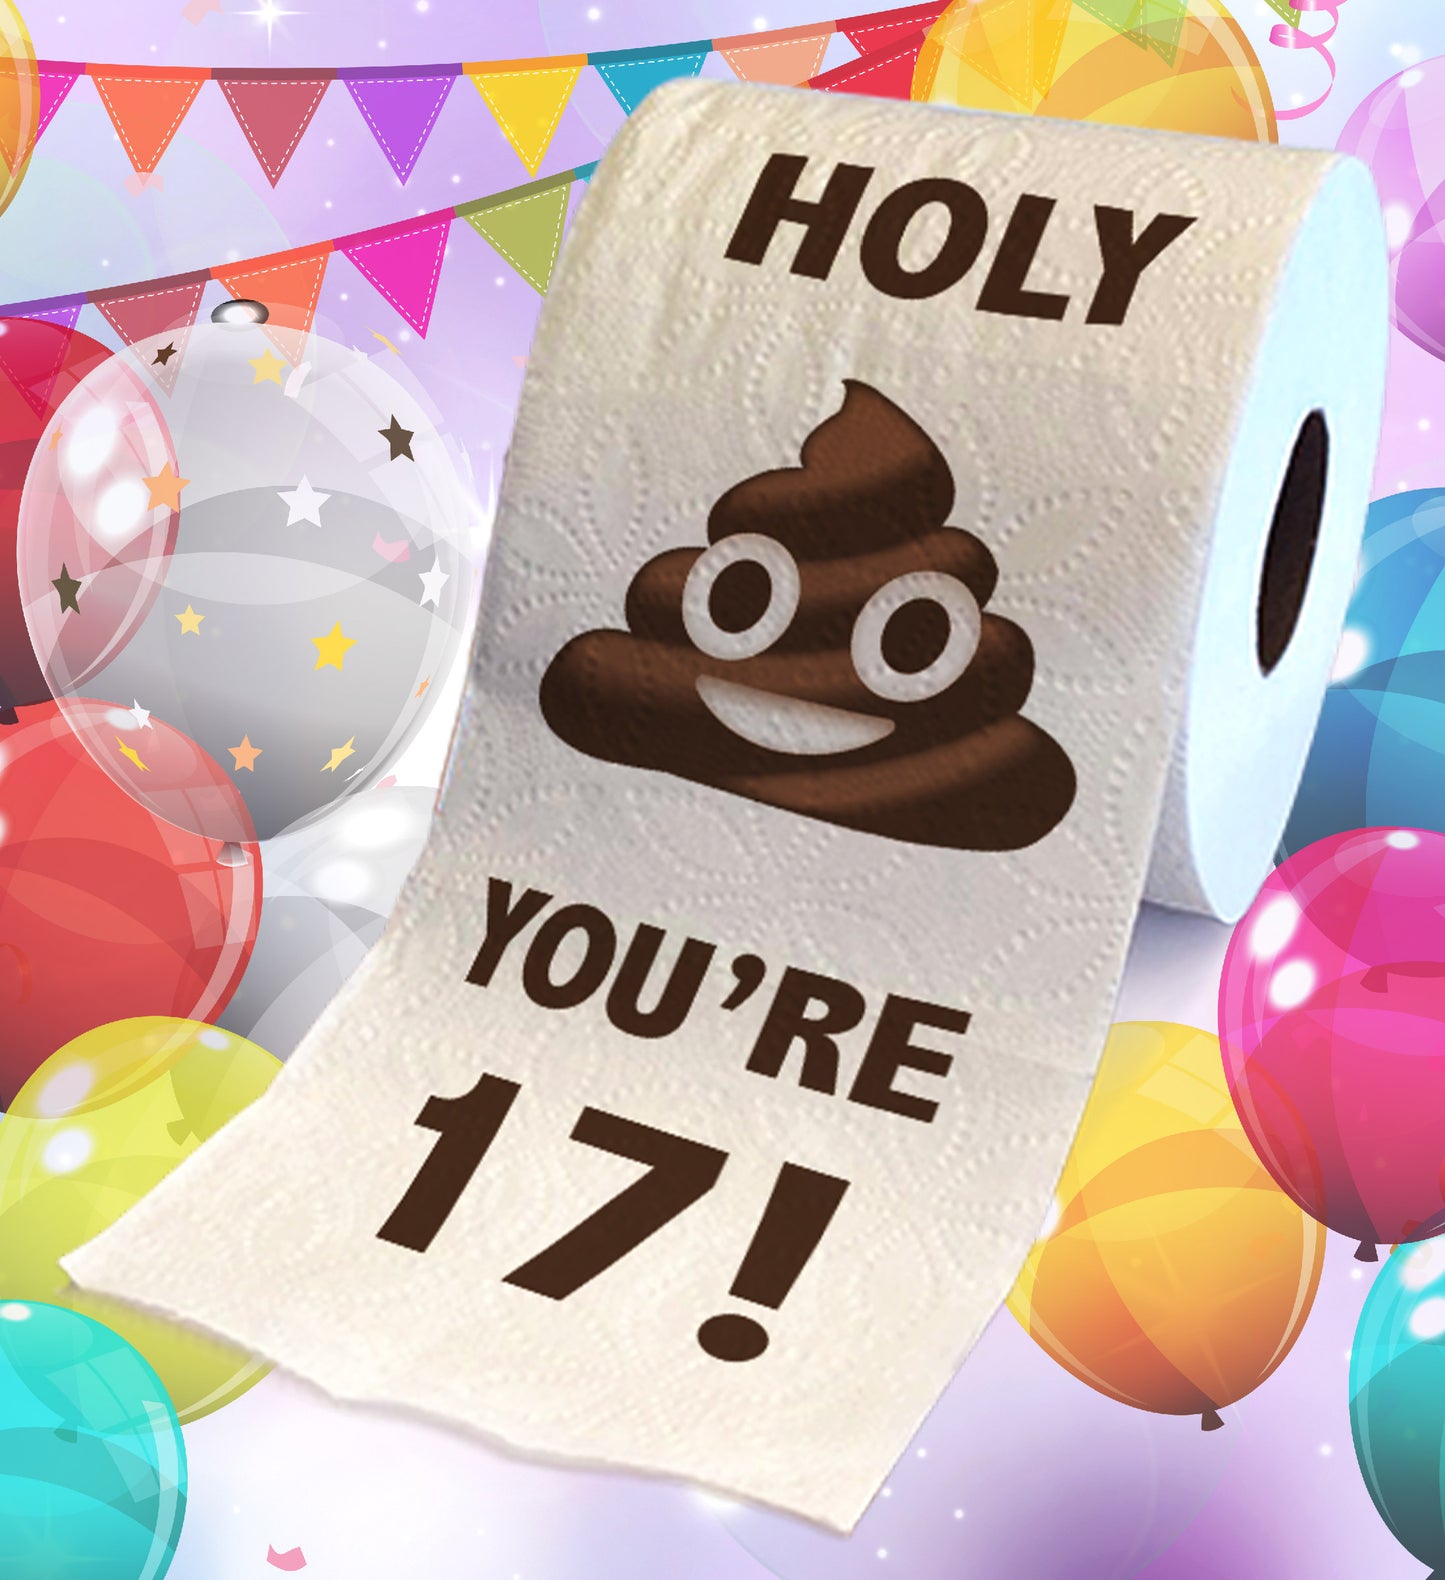 Printed TP Holy Poop You're 17 Printed Toilet Paper Funny Gag Gift - 500 Sheets